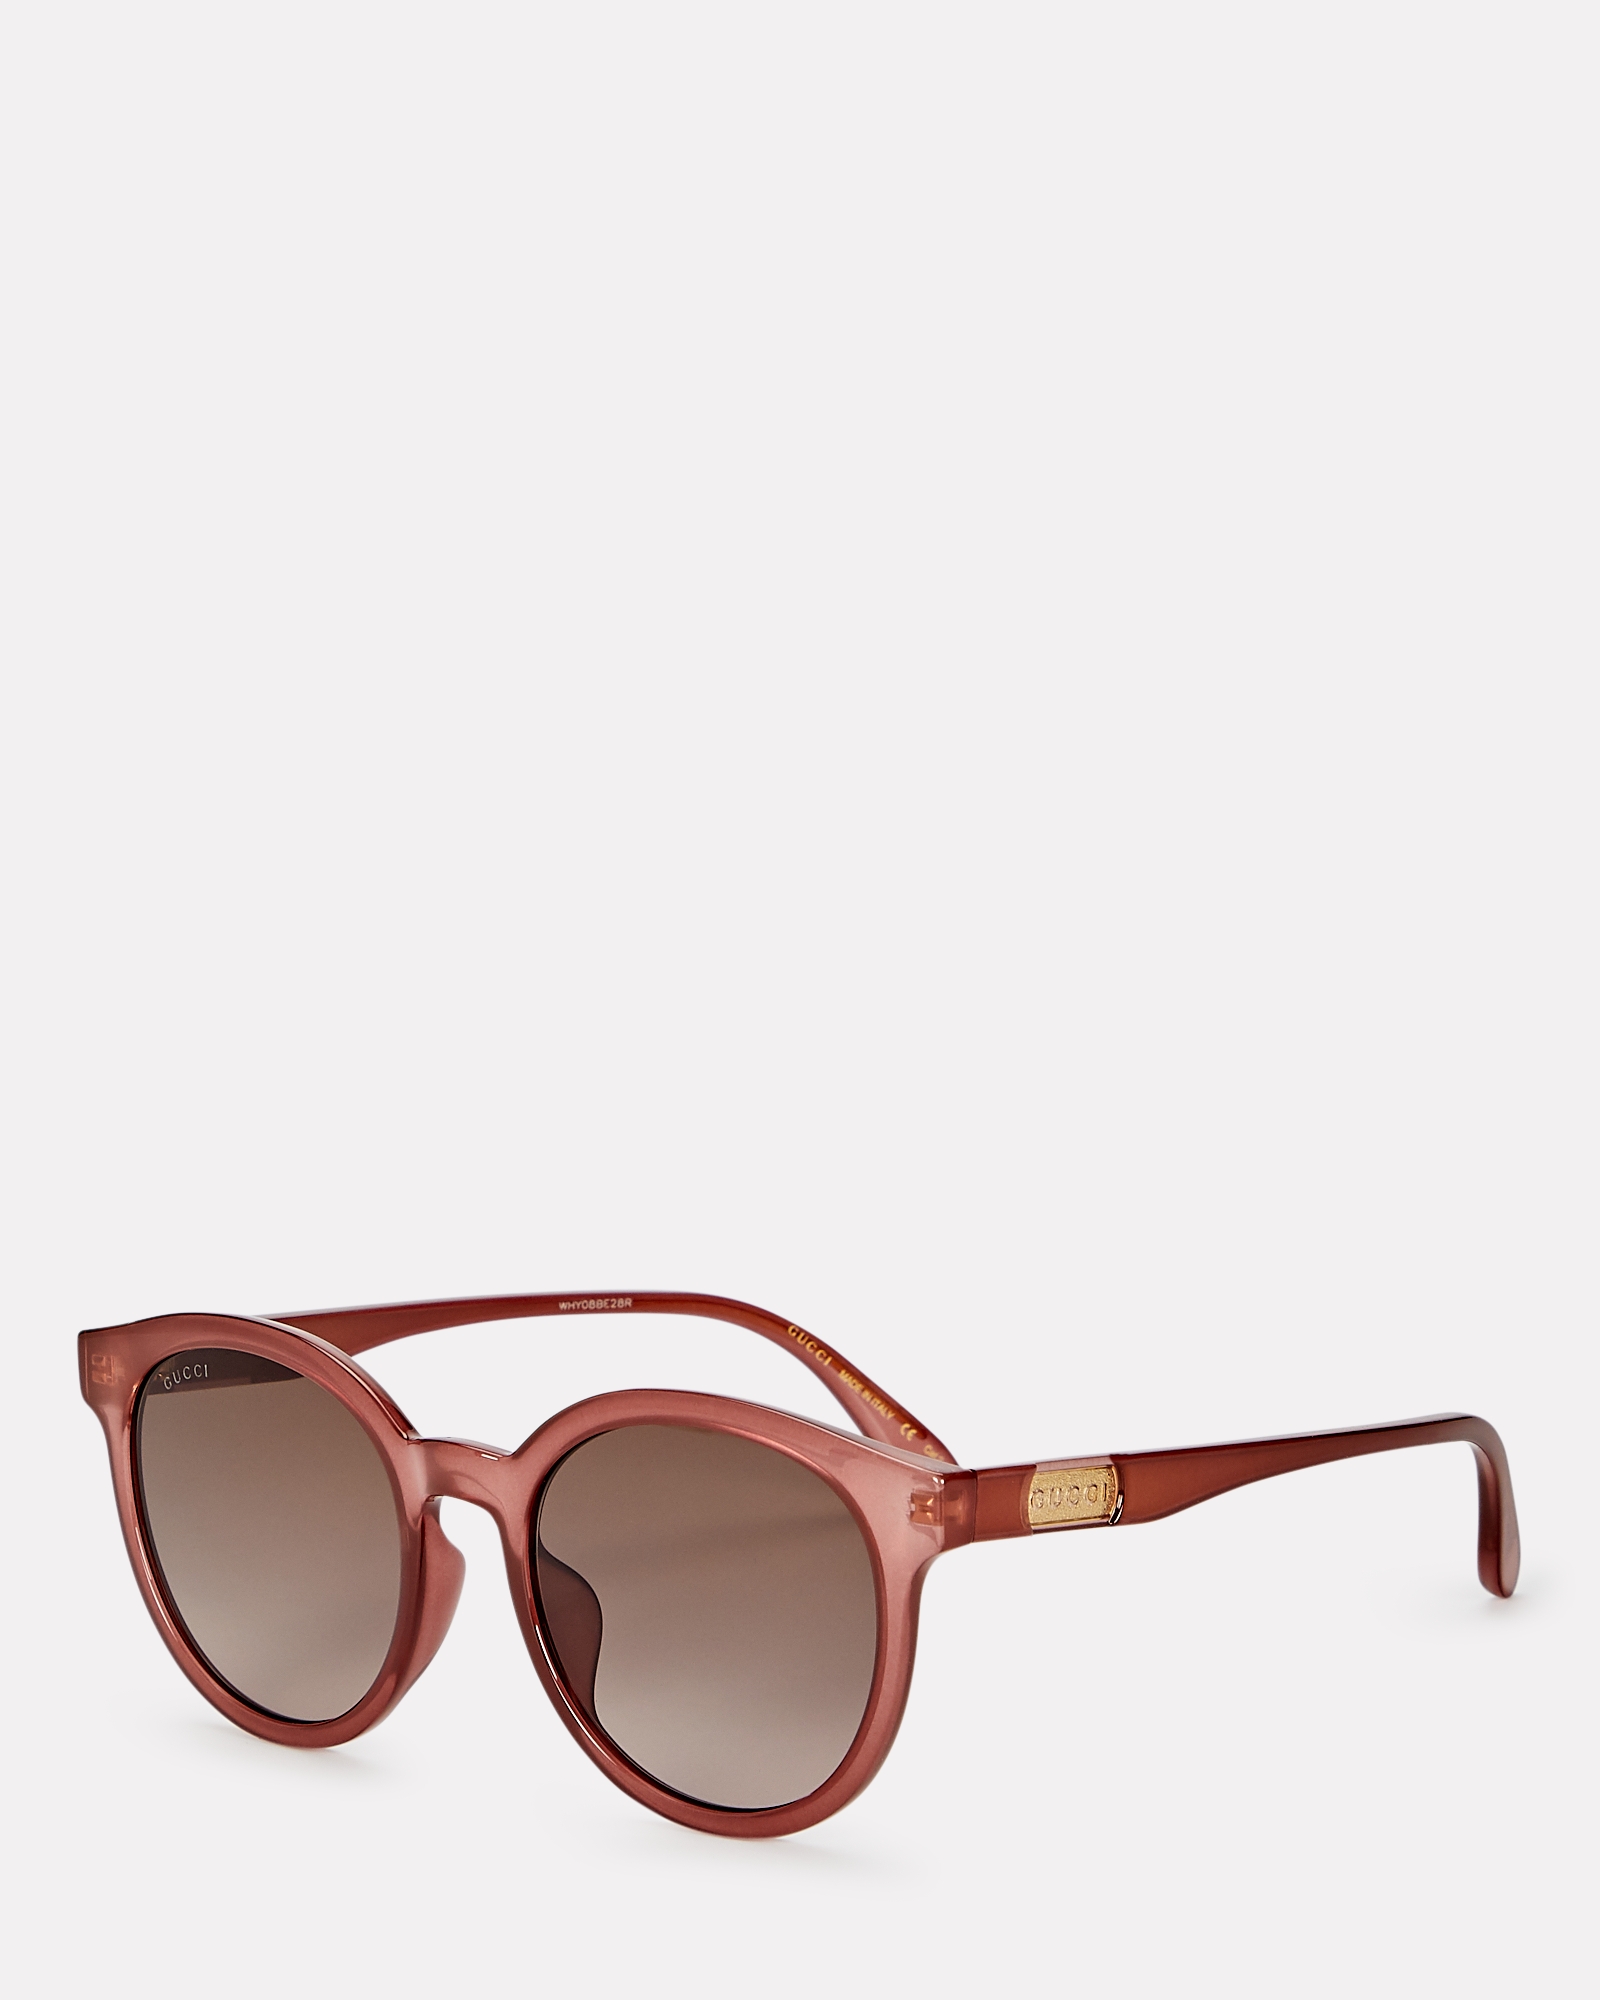 Gucci Rounded Cat Eye Sunglasses | INTERMIX®